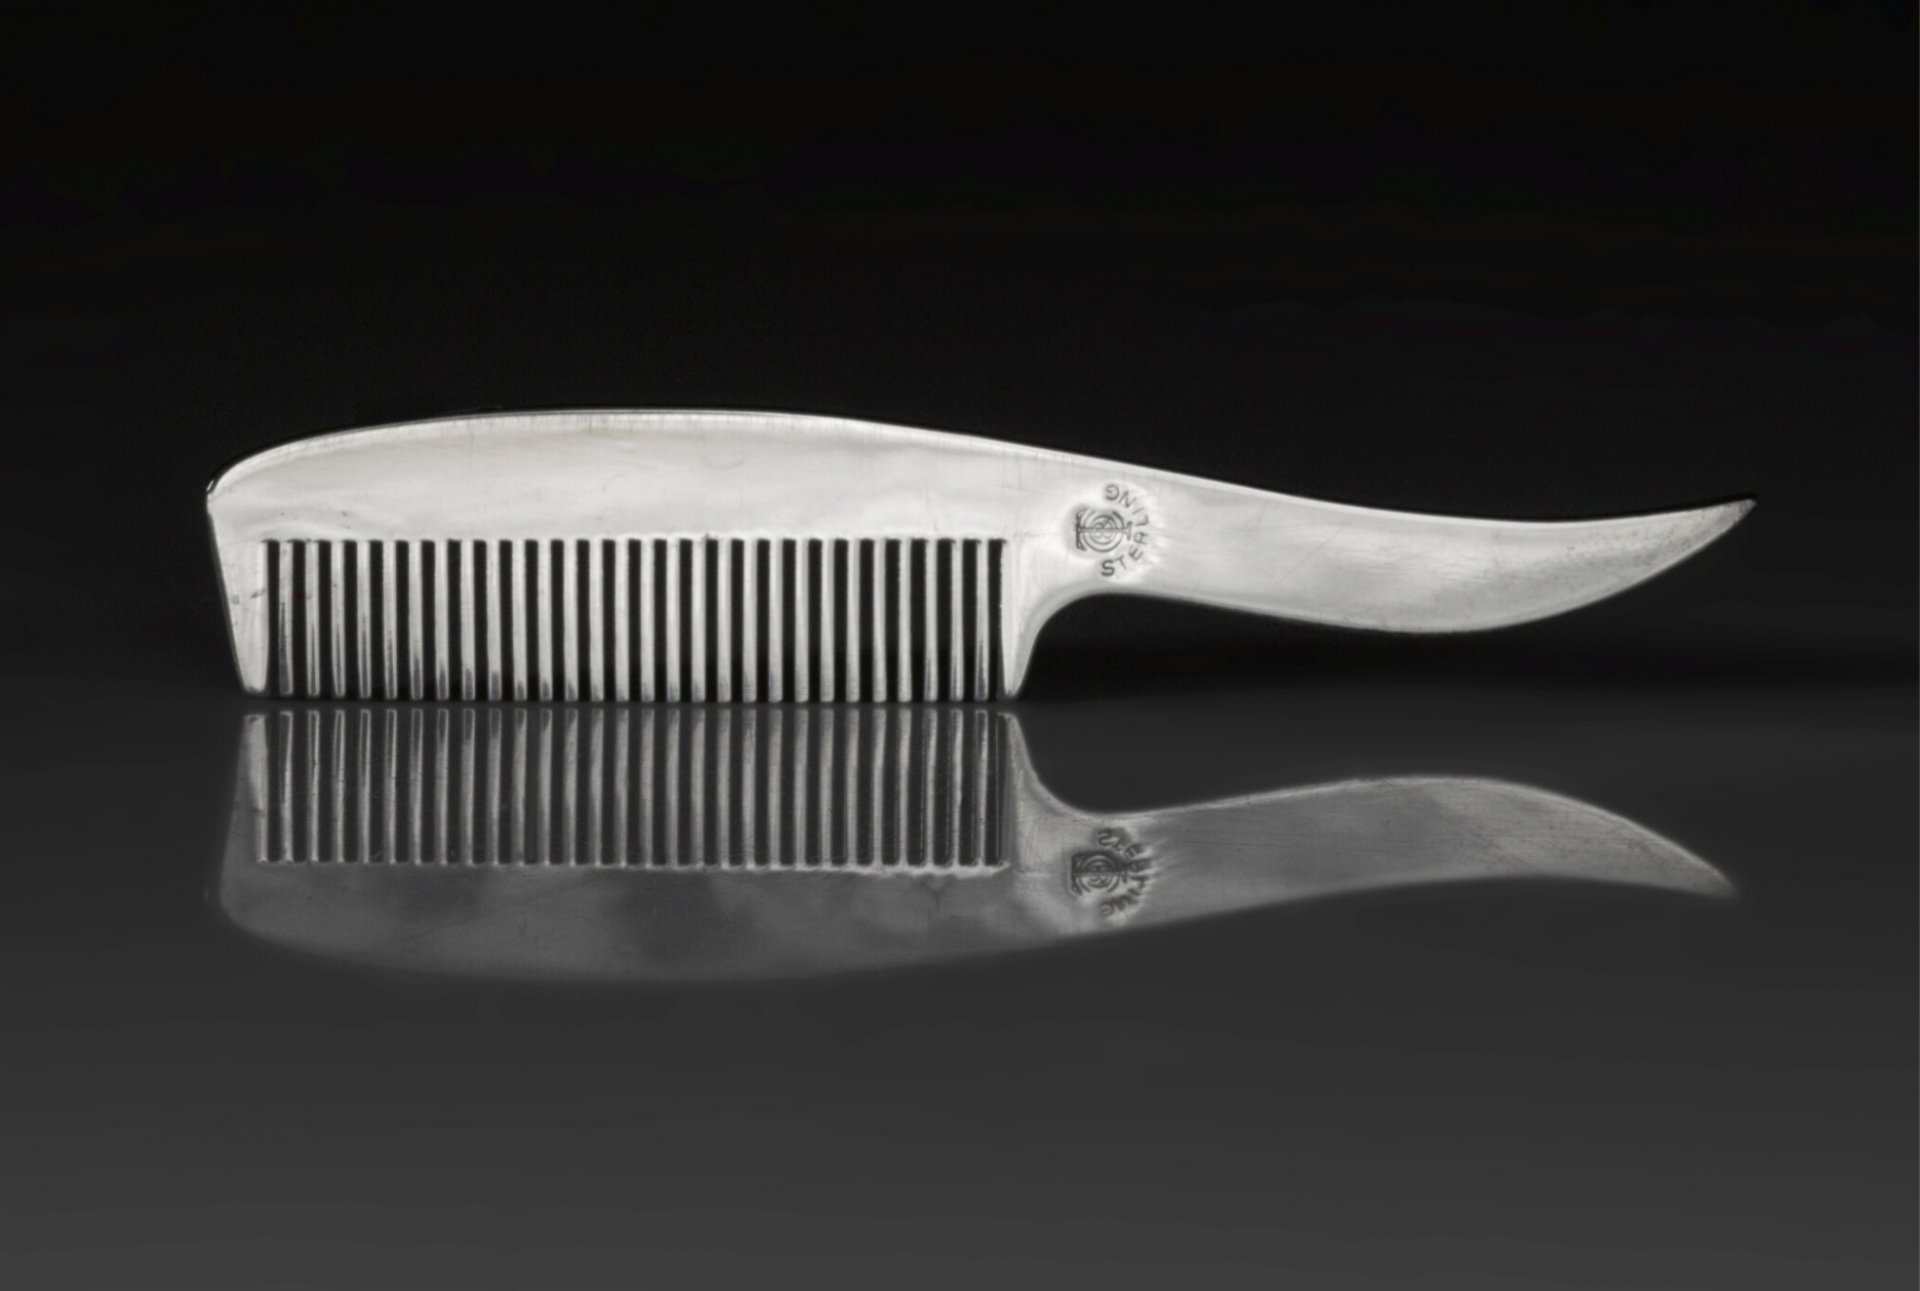 An image of a silver moustache comb by Tiffany & Co against a black background.